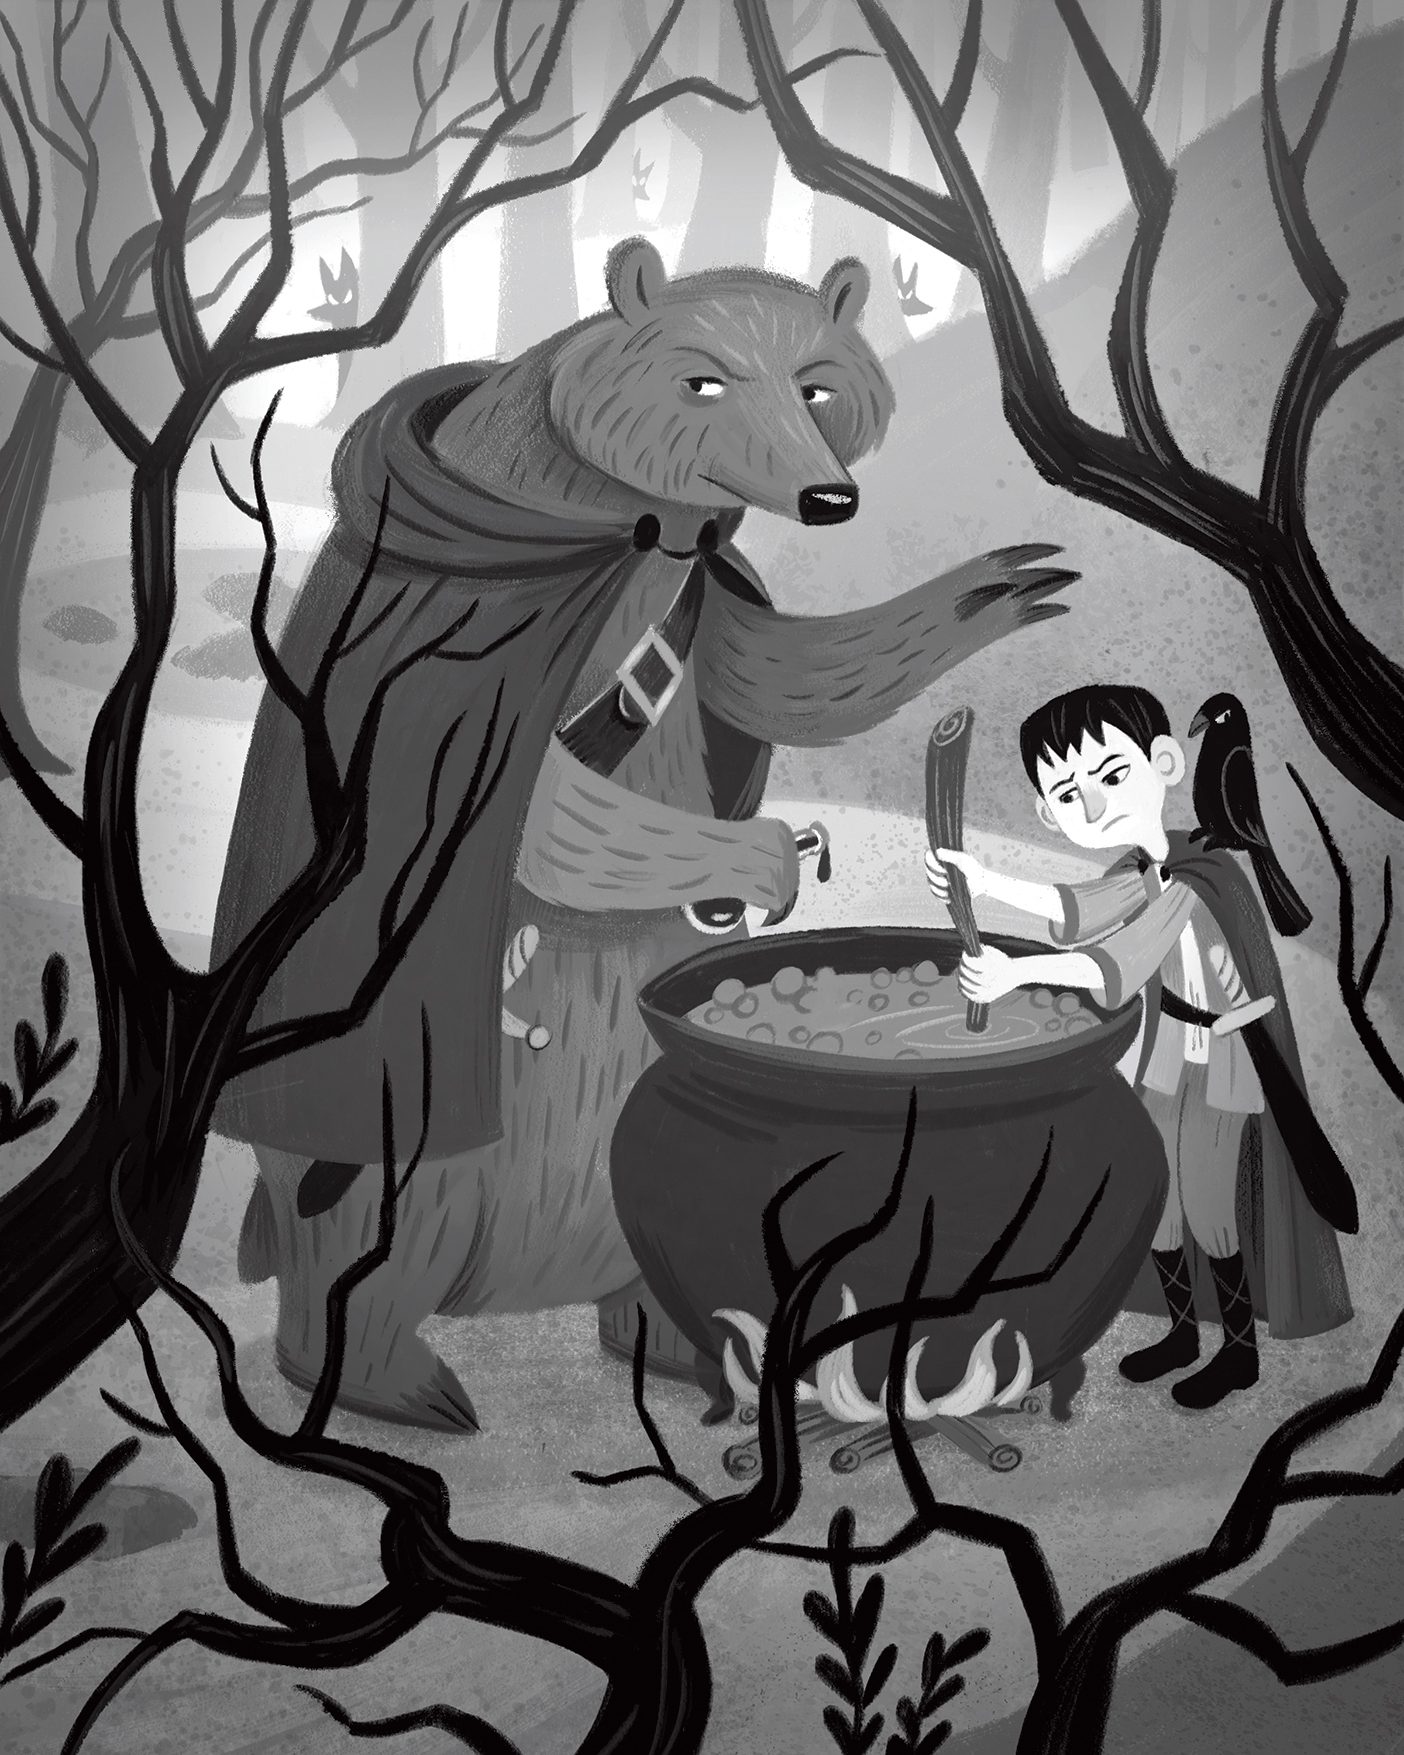 An illustration of a bear wearing a cape and a young boy mixing a cauldron together.